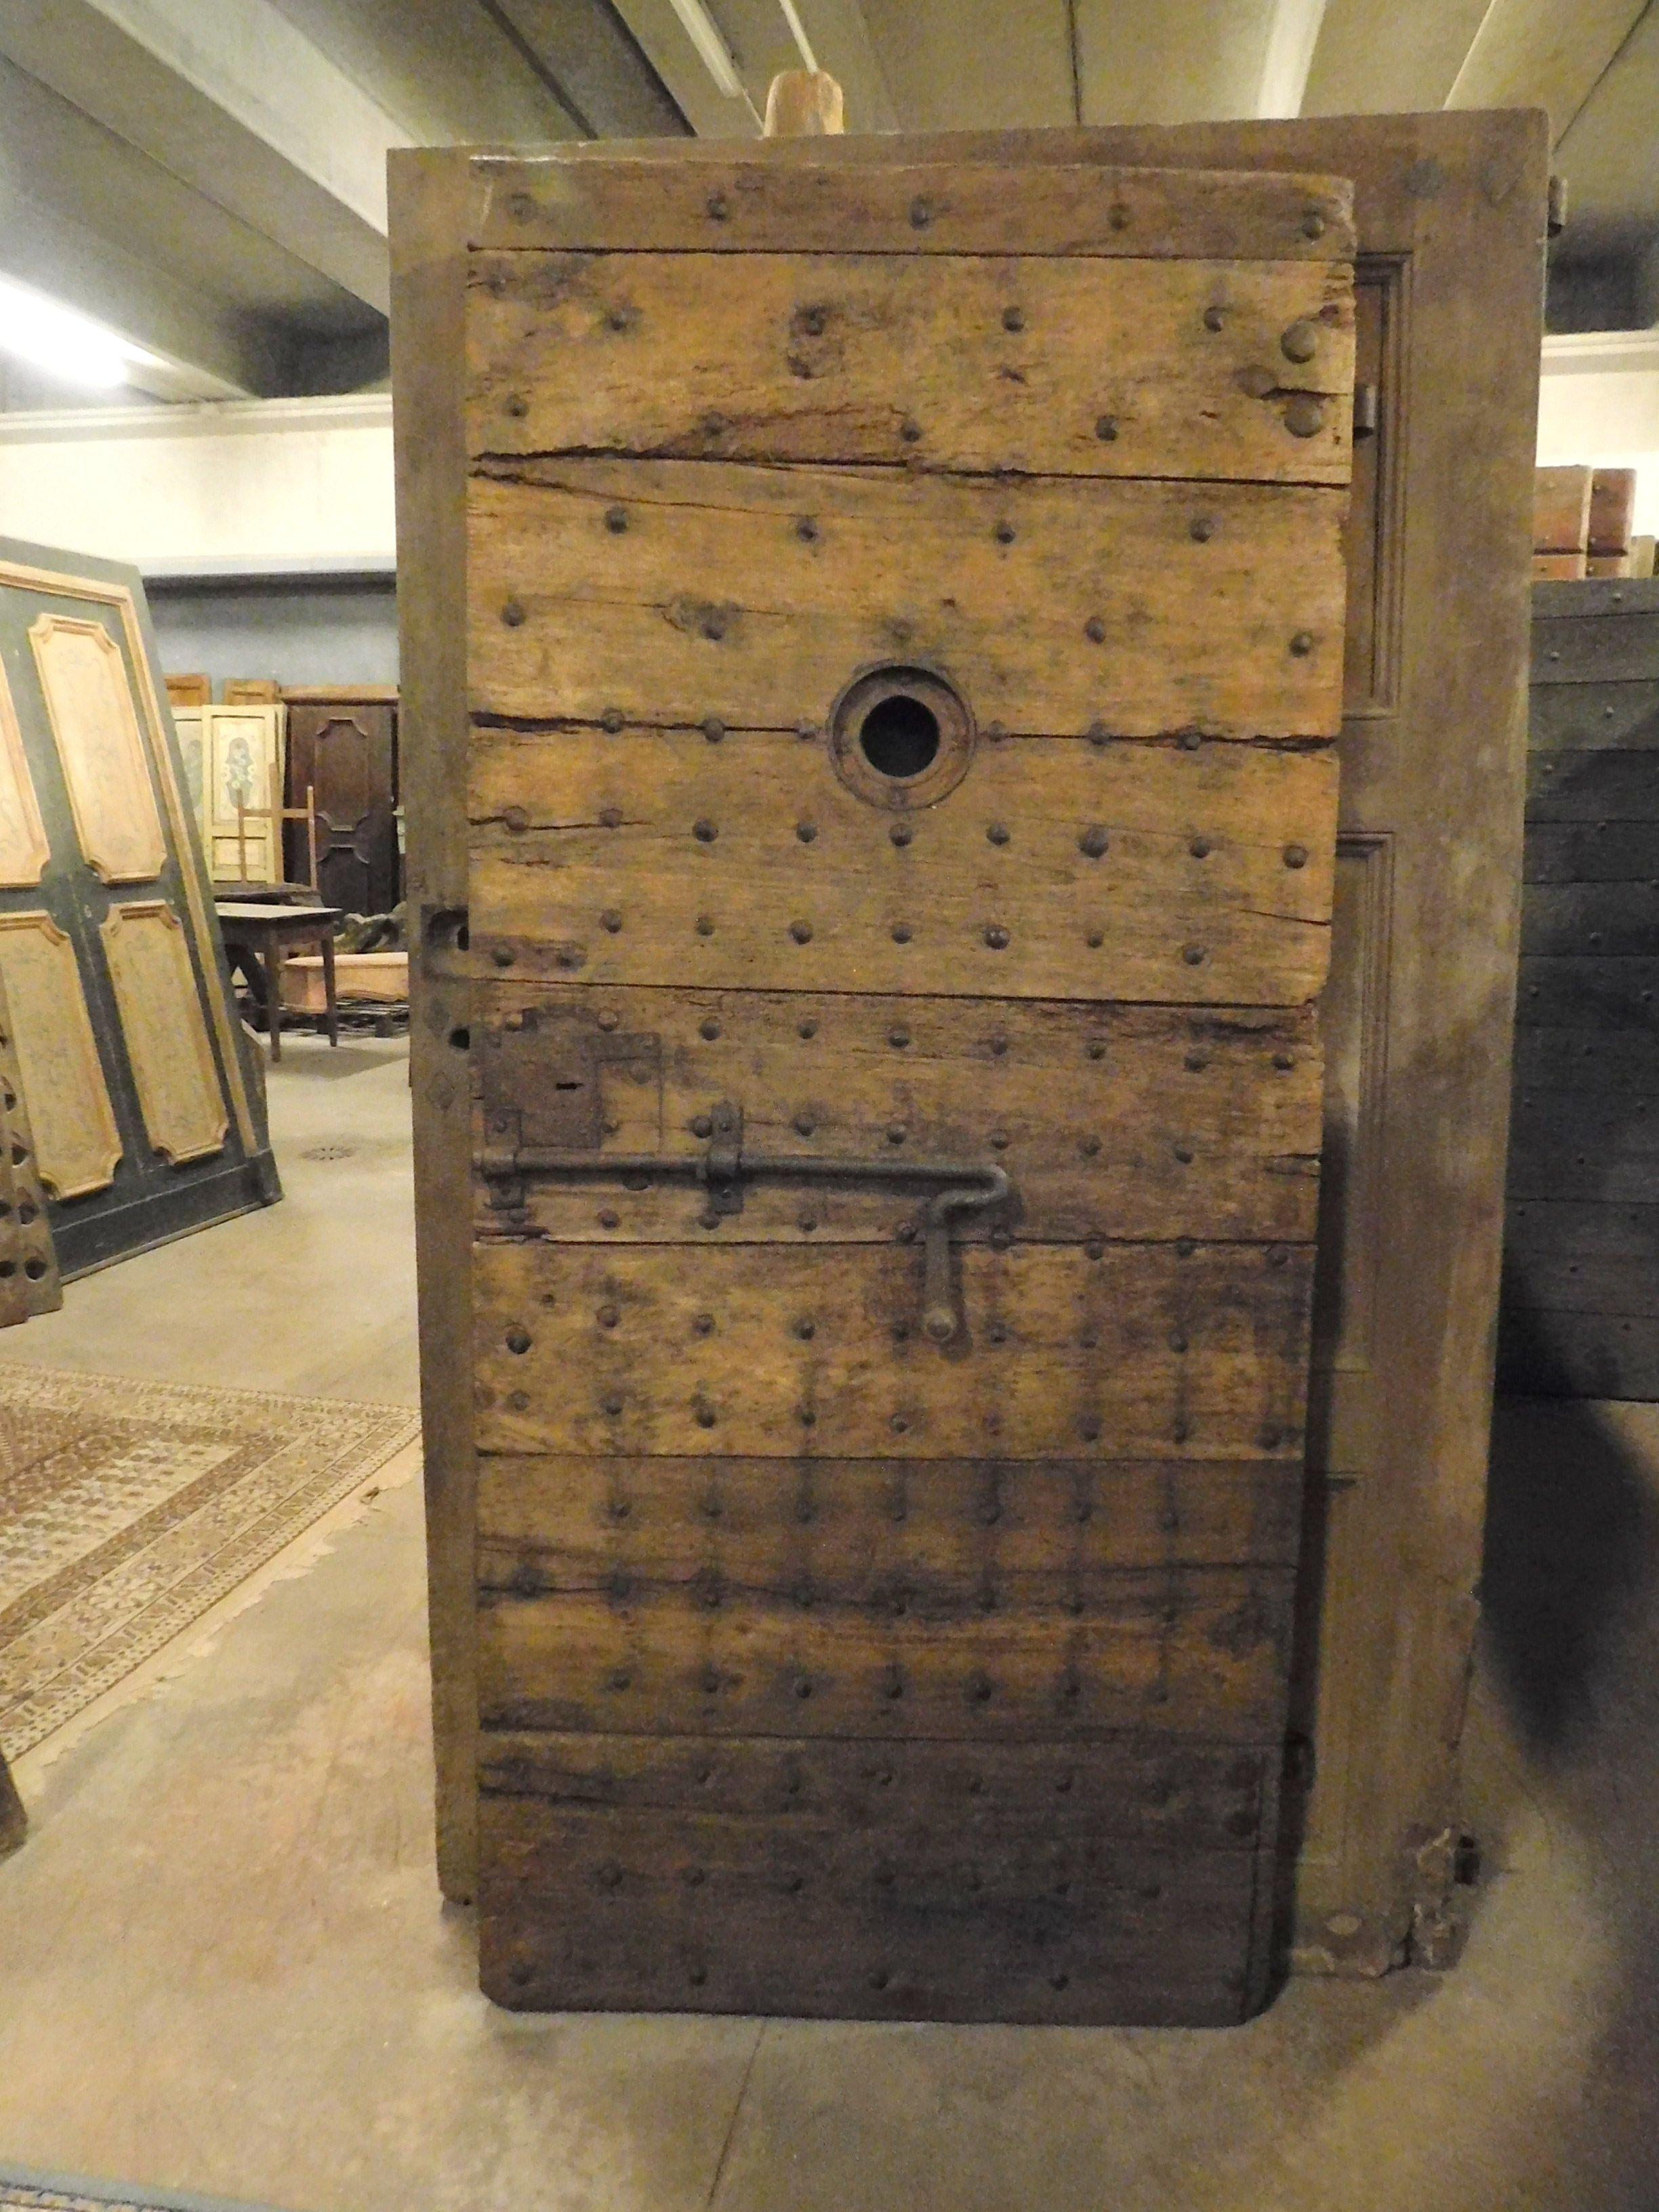 Ancient prison door in brown poplar, beautiful patina of centuries-old, still with original irons and locks, built entirely by hand in the 19th century for a castle prison in northern Italy
Size: cm W 94 x H 207 x D 6, perfect for a wine cellar,